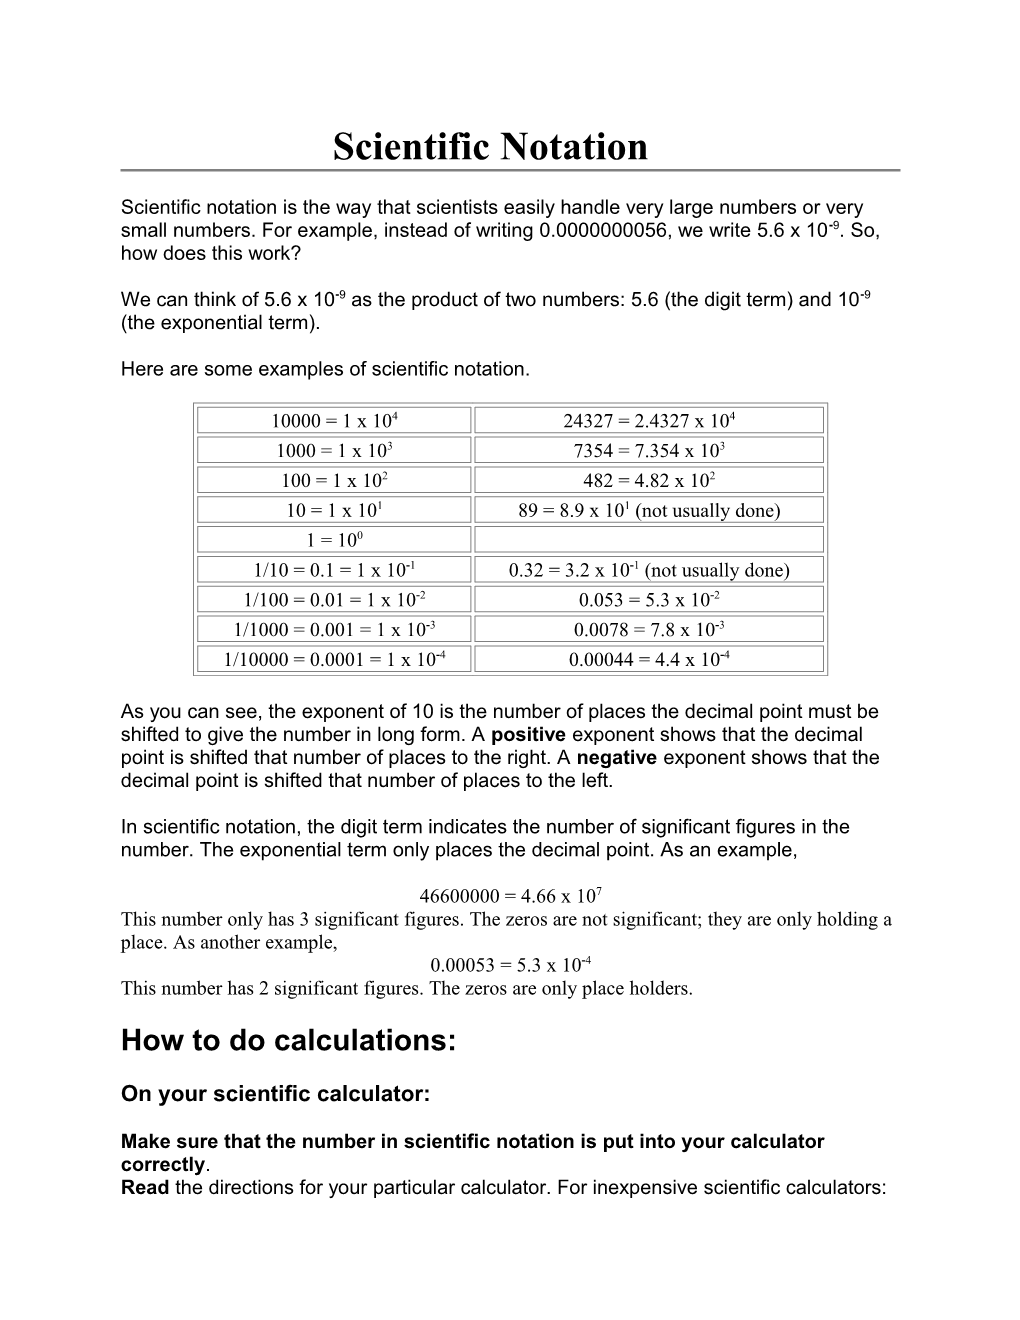 Here Are Some Examples of Scientific Notation